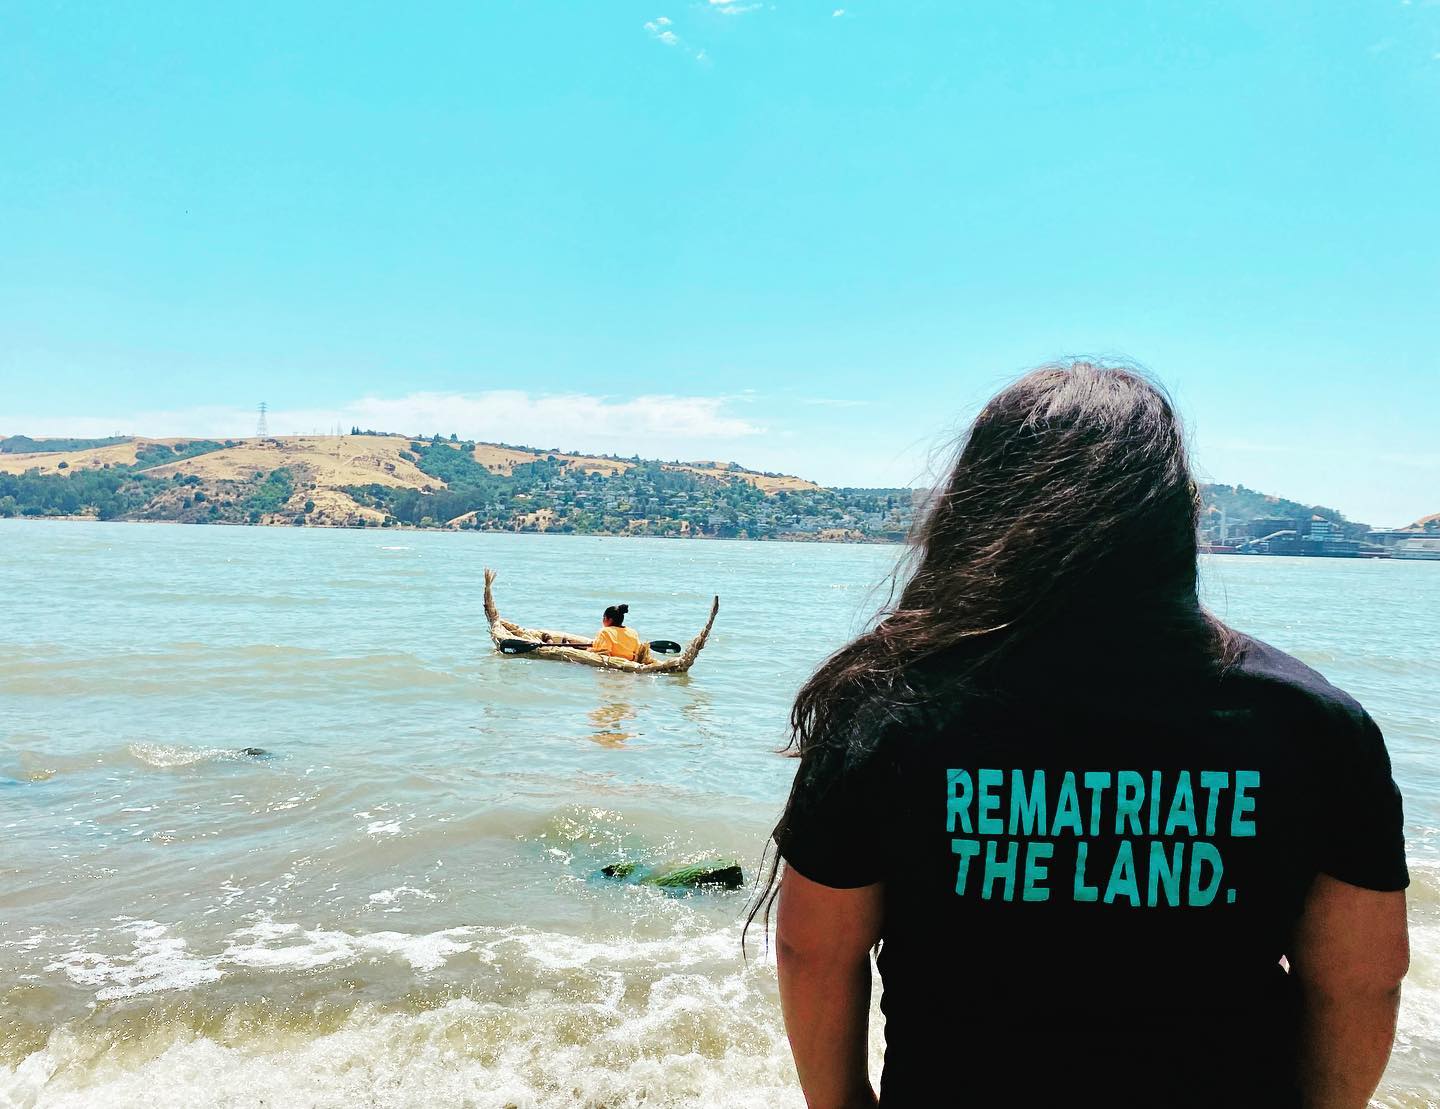 Land Back
Water Back 
Salmon Back
Culture Back 

Beautiful to see the tule boat we made  at Lisjan make its innagural voyage in the Carquinez Strait with @villages_of_lisjan  and @run4salmon. 

#rematriatetheland #freetherivers #protectsalmon #californiaindian #culturalregeneration #ohloneland